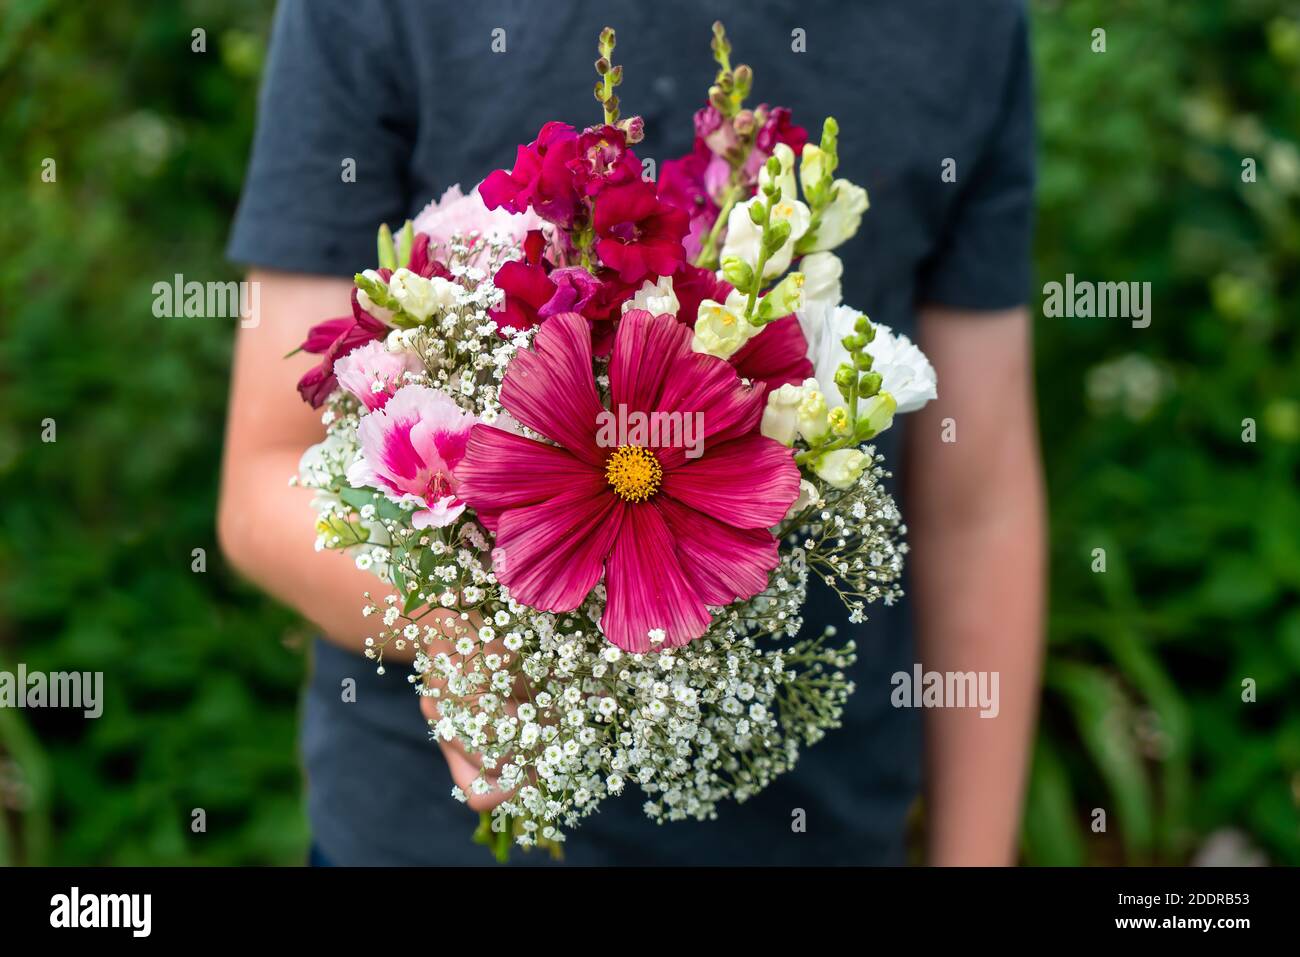 A bouquet of cut flowers containing baby's breath, cosmos, godetia, and snapdragons. Stock Photo